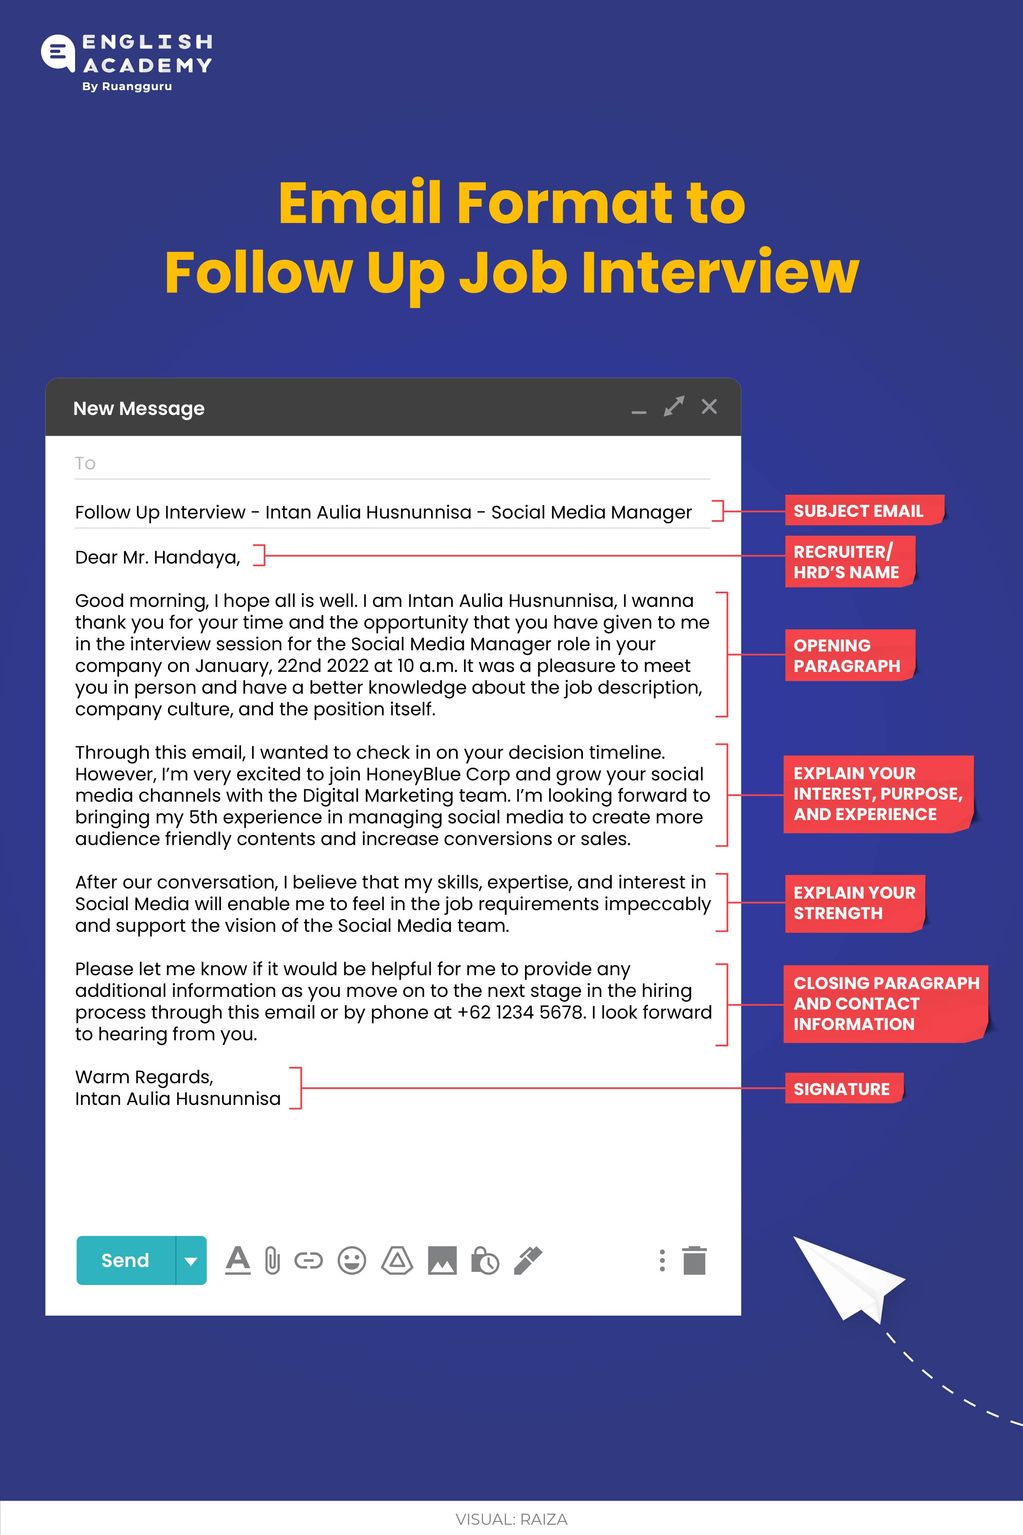 Template email follow up interview kerja